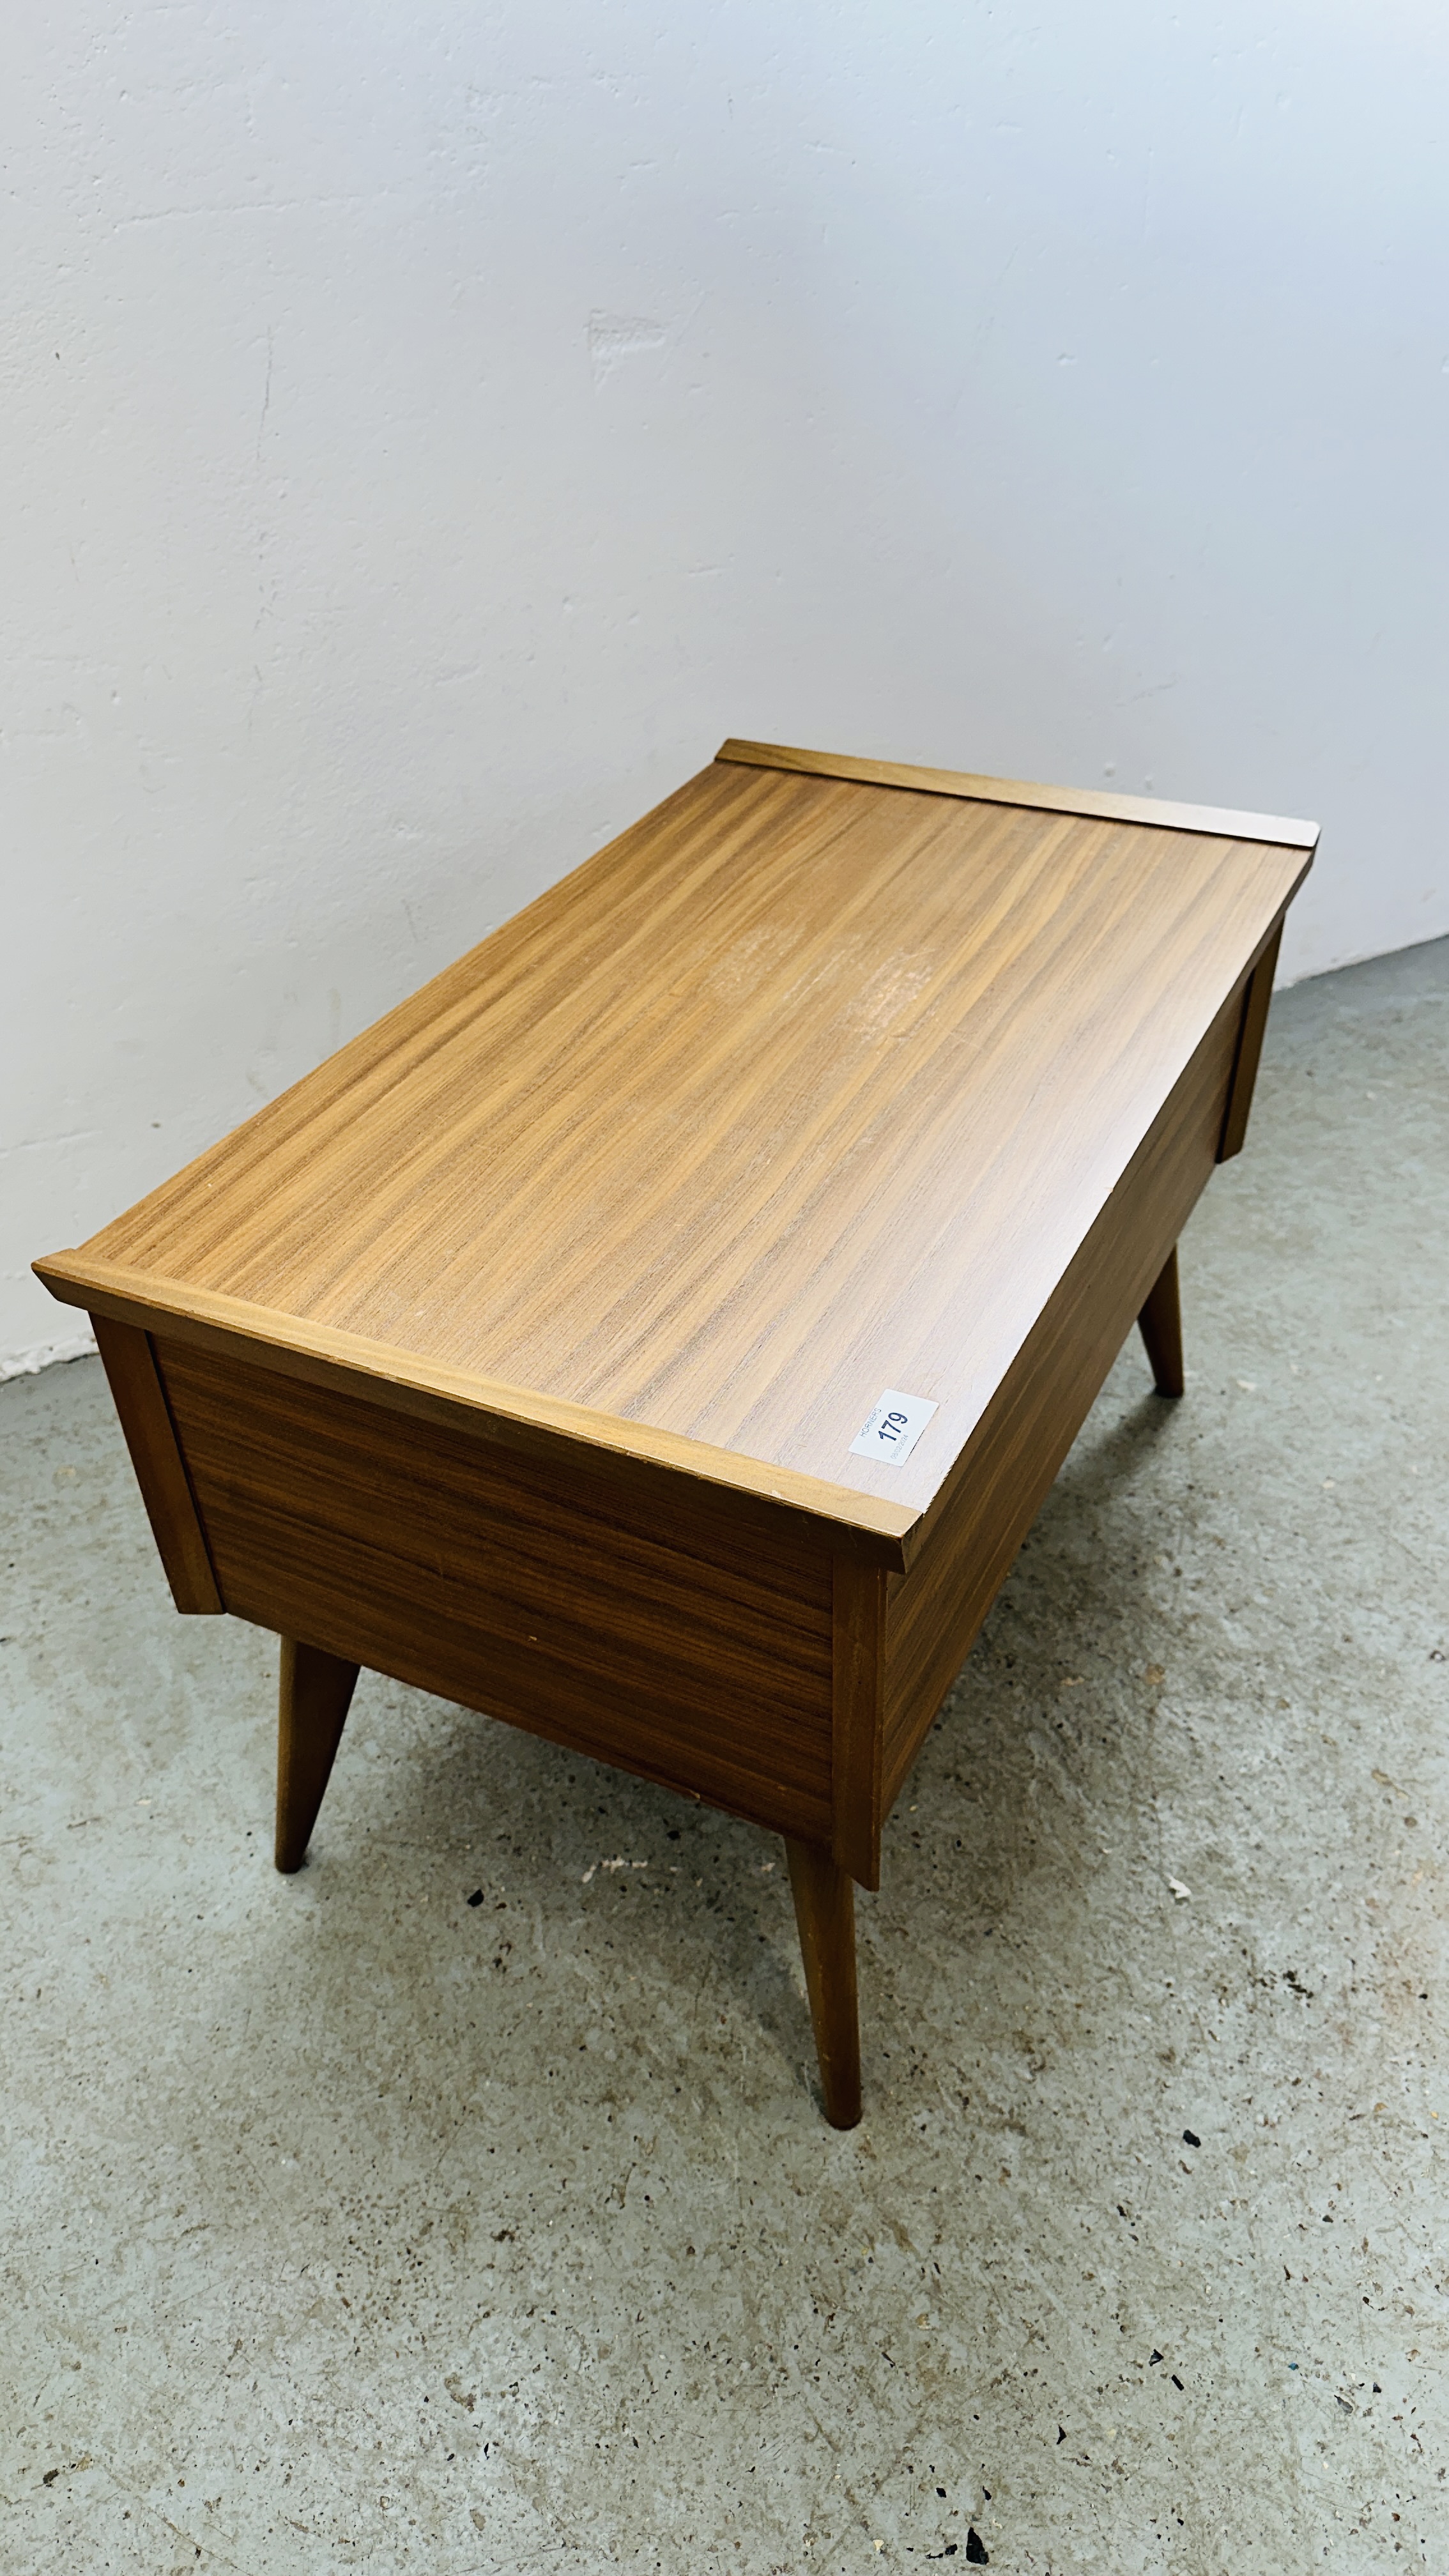 A MID CENTURY TEAK FINISH 'RNOLD' SEWING BOX CONTAINING LARGE QUANTITY MIXED SEWING ACCESSORIES - Image 5 of 5